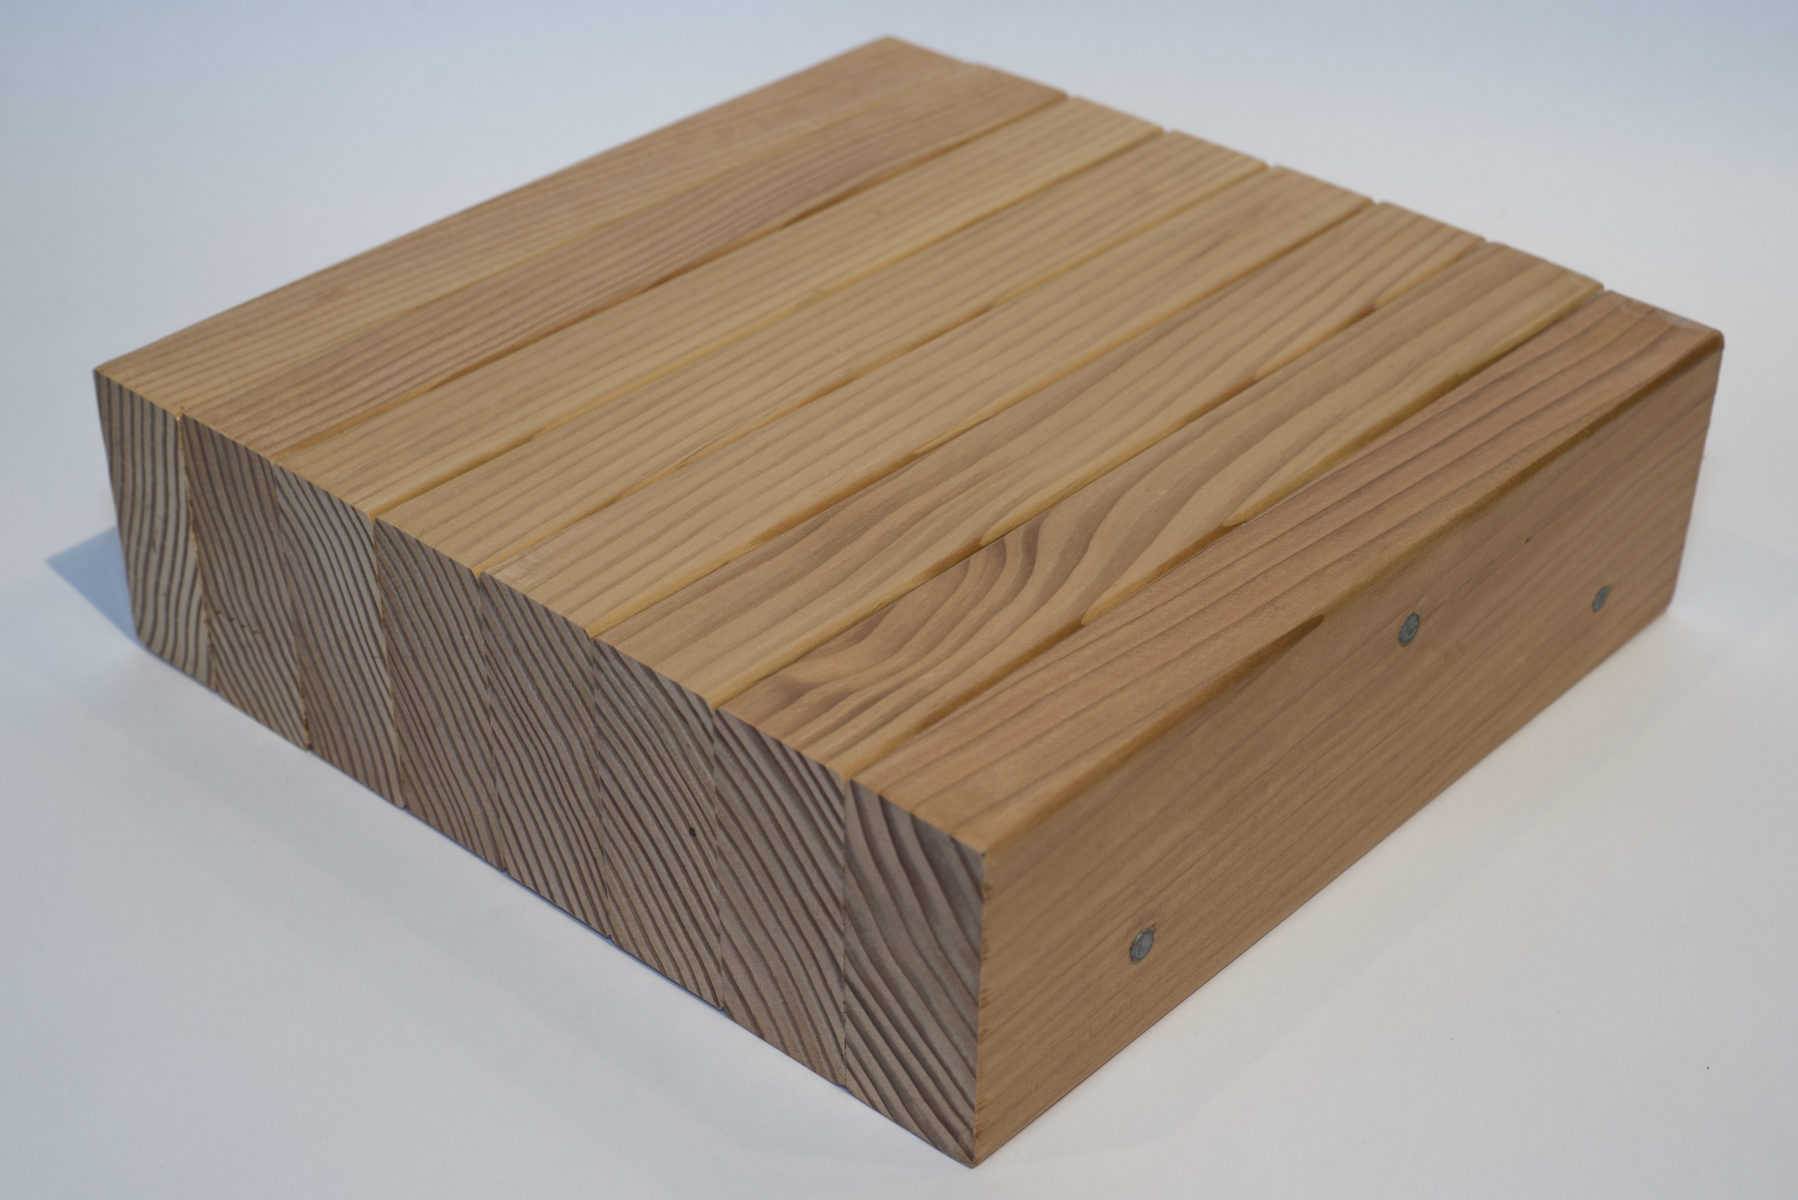 Close up of demonstration section of nail-laminated timber (NLT) showing 8 dimension lumber segments stacked together on edge and fastened together with nails to form a solid structural element